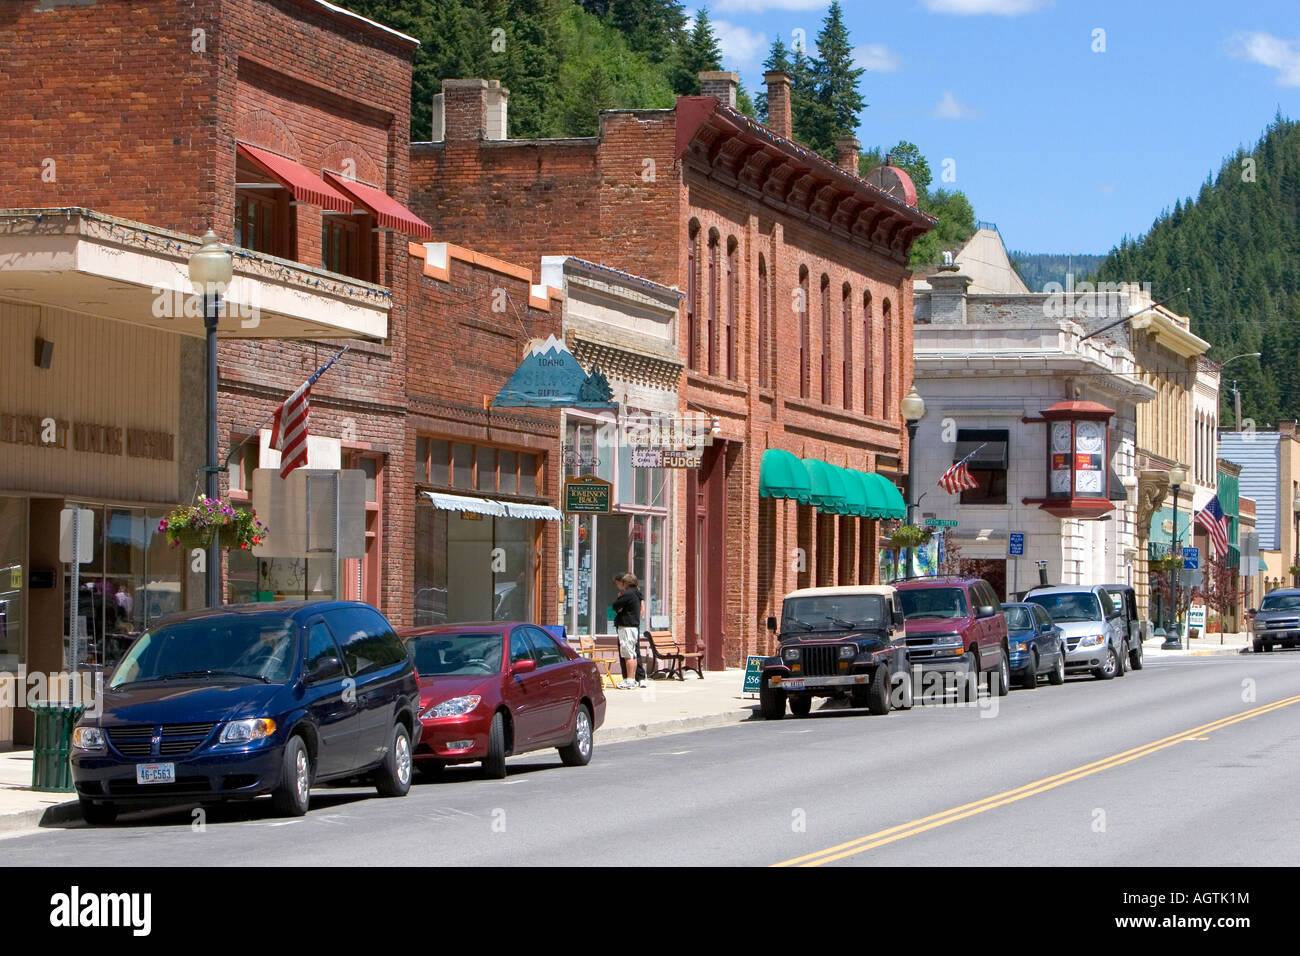 Main street and old brick buildings in the small town of Wallace Idaho Stock Photo